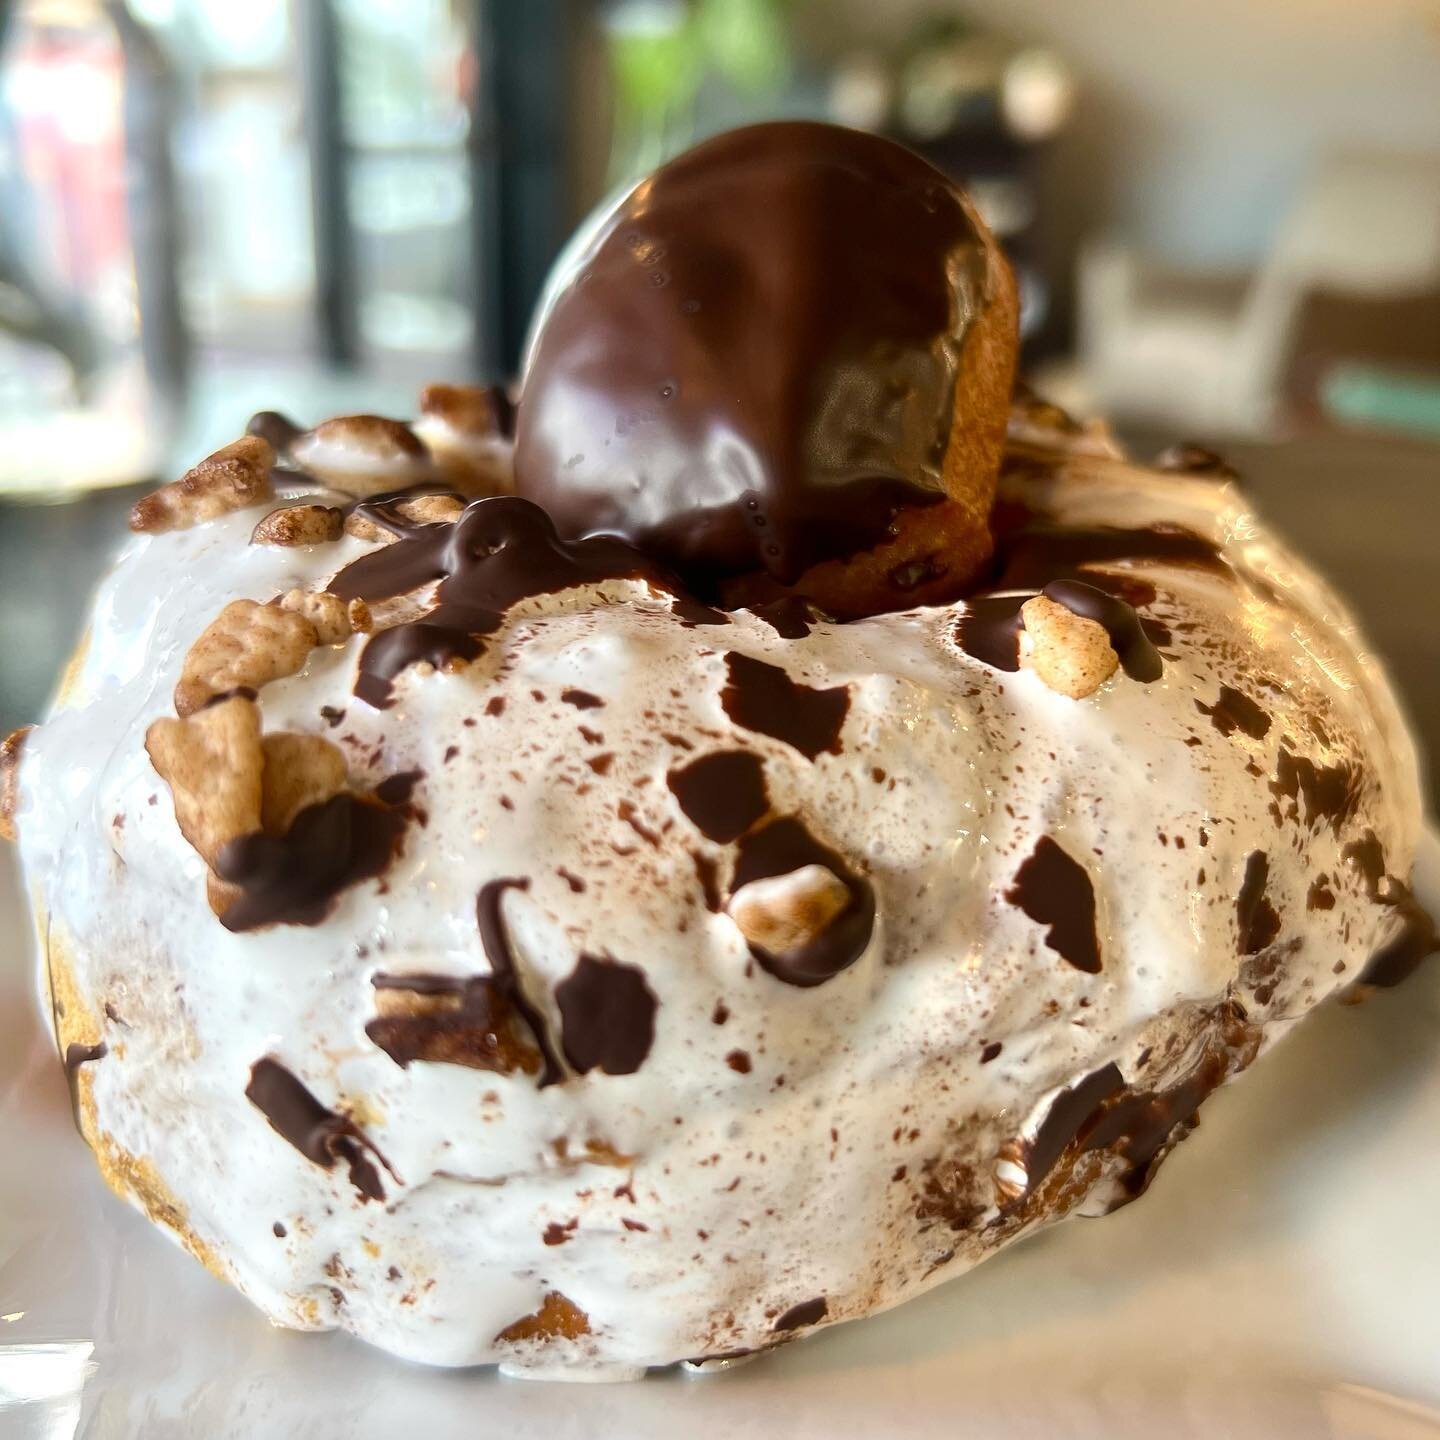 A donut so good, you&rsquo;ll be asking for s&rsquo;more!
.
.
.
.
#thewestend #westasheville #ashevillenc #breakfast #brunch #lunch #pastries #coffee #latte #latteart #appalachai #asheville #sandwiches #freshbread #specialtycoffee #pennycup #avlfood 